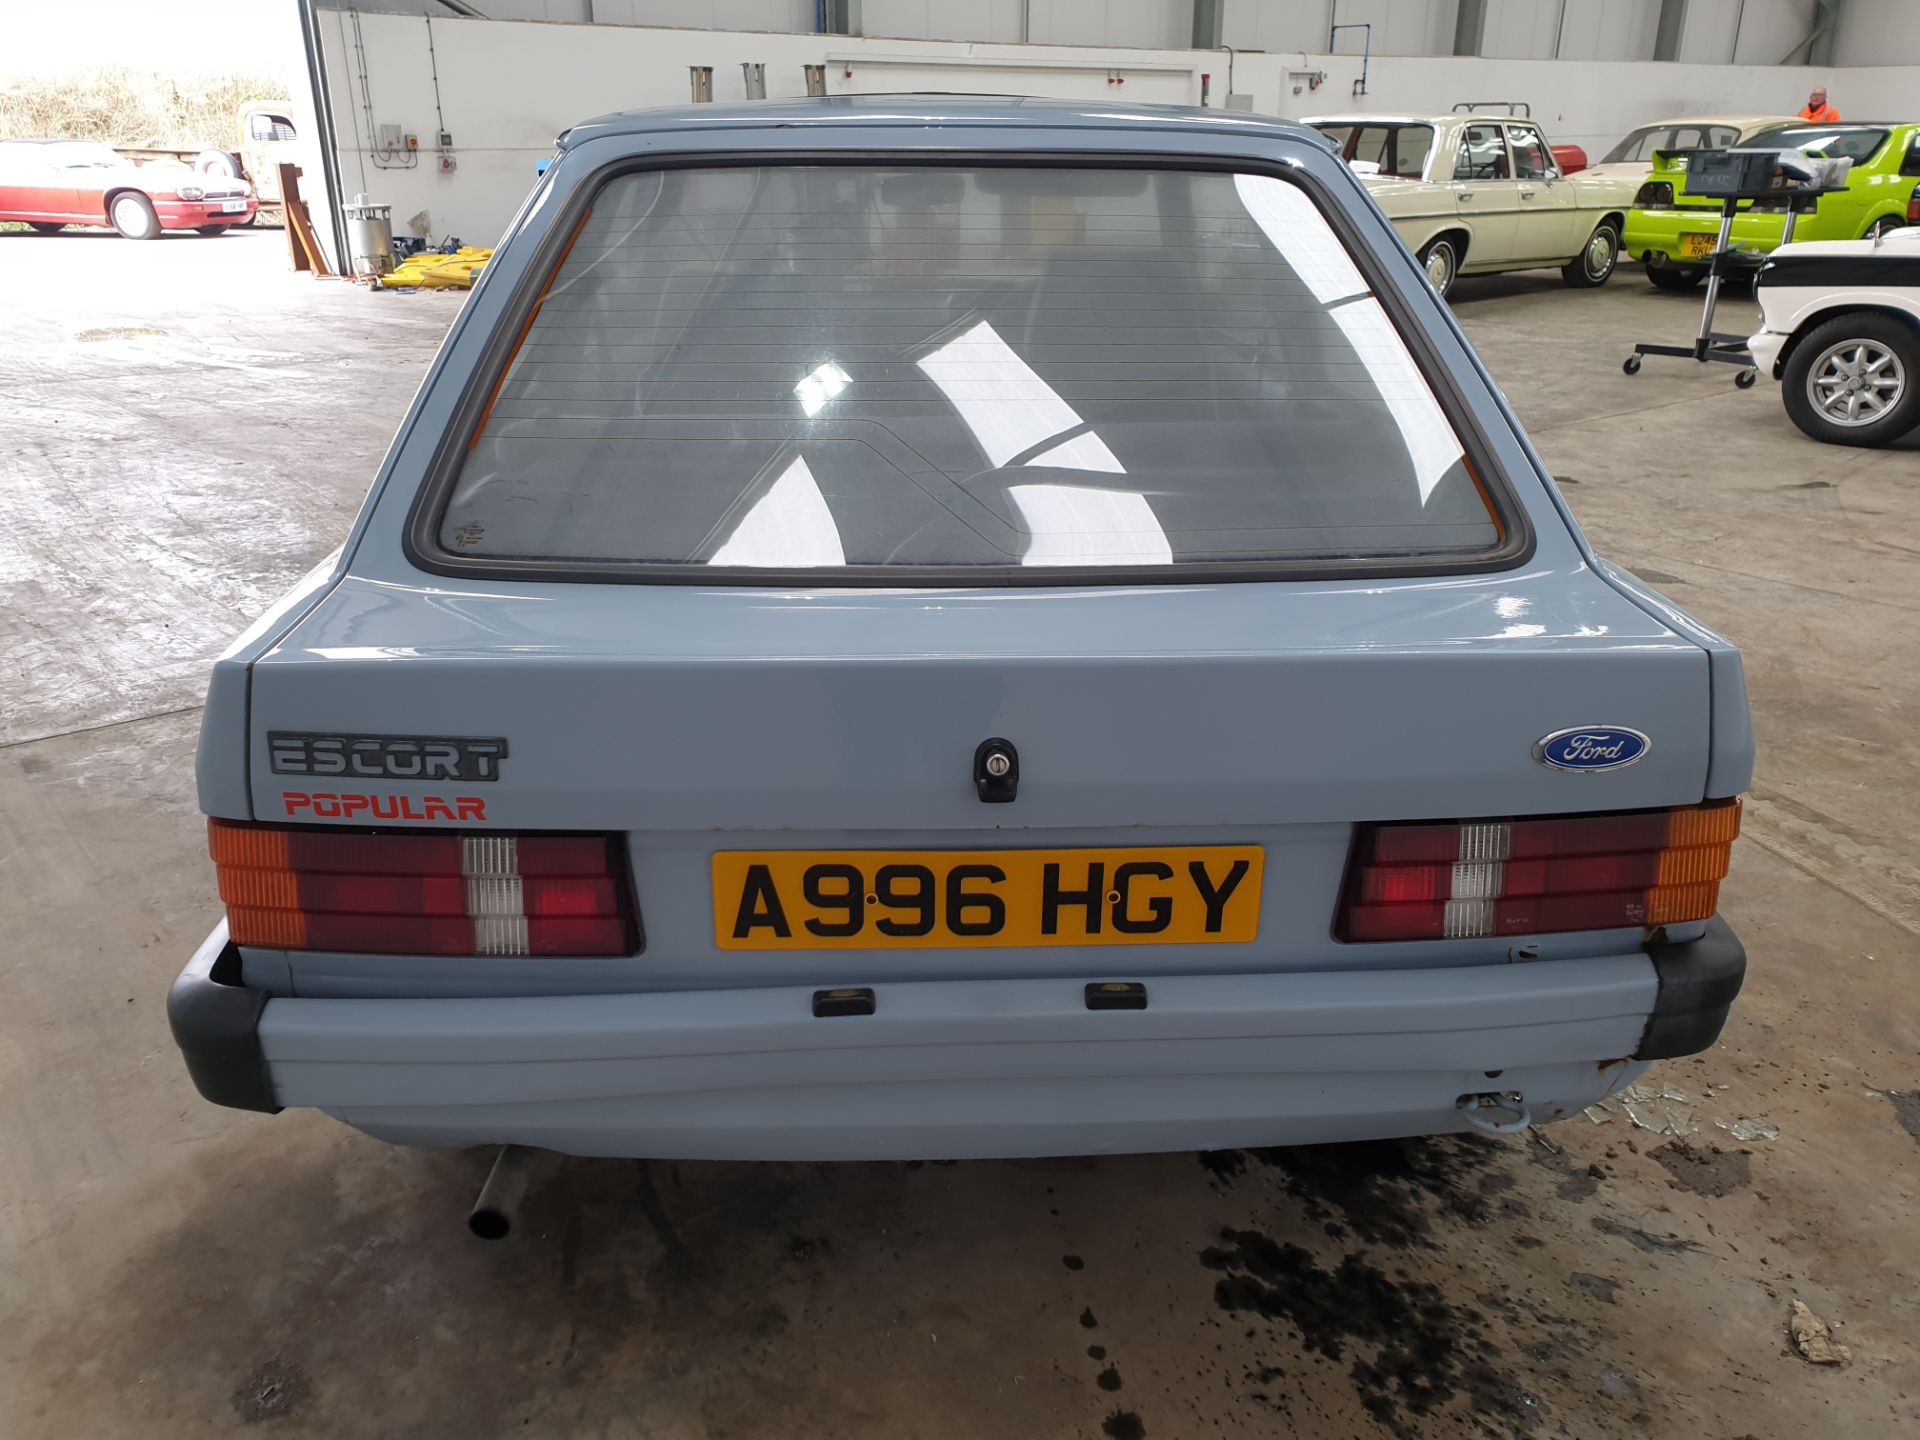 1984 Ford Escort 1100 3dr - Image 4 of 14